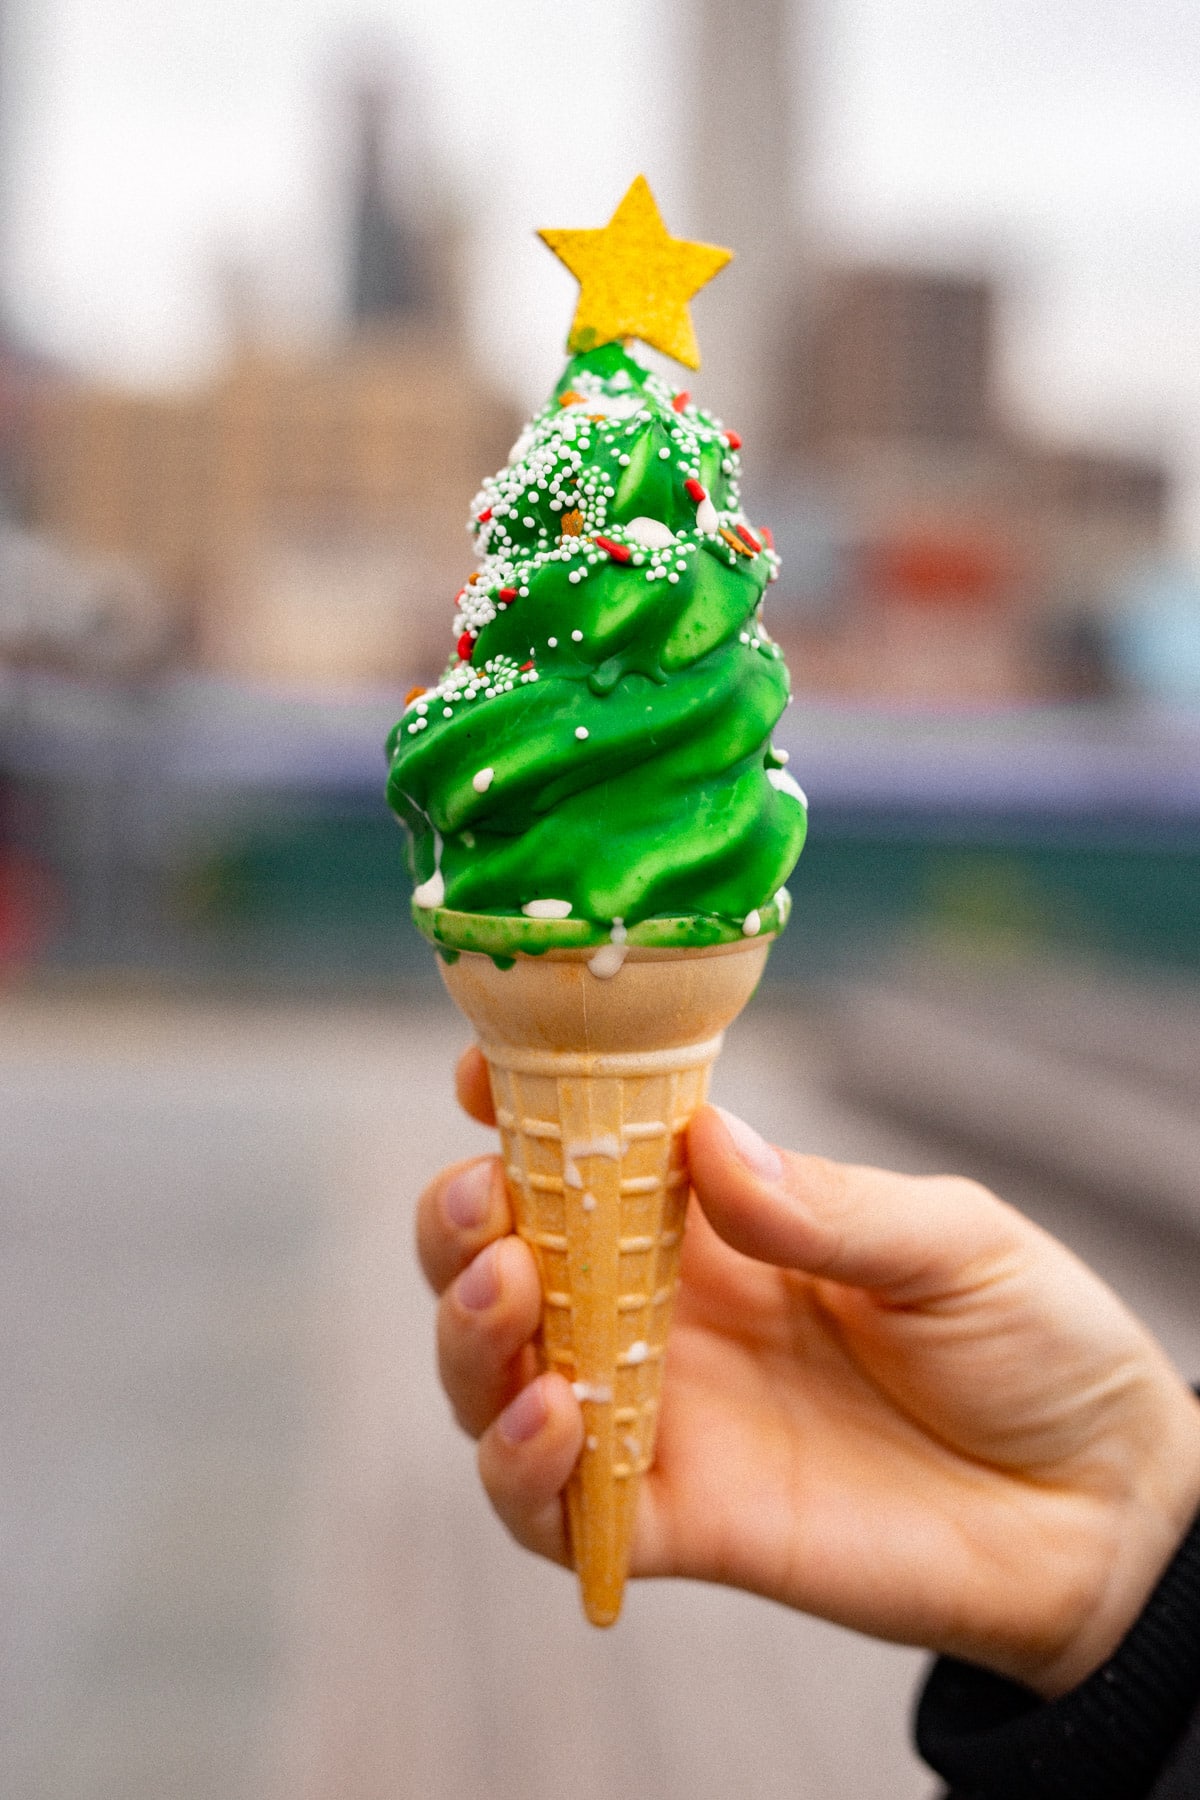 The Grinch Mister Dips December in NYC
kid-friendly desserts in NYC